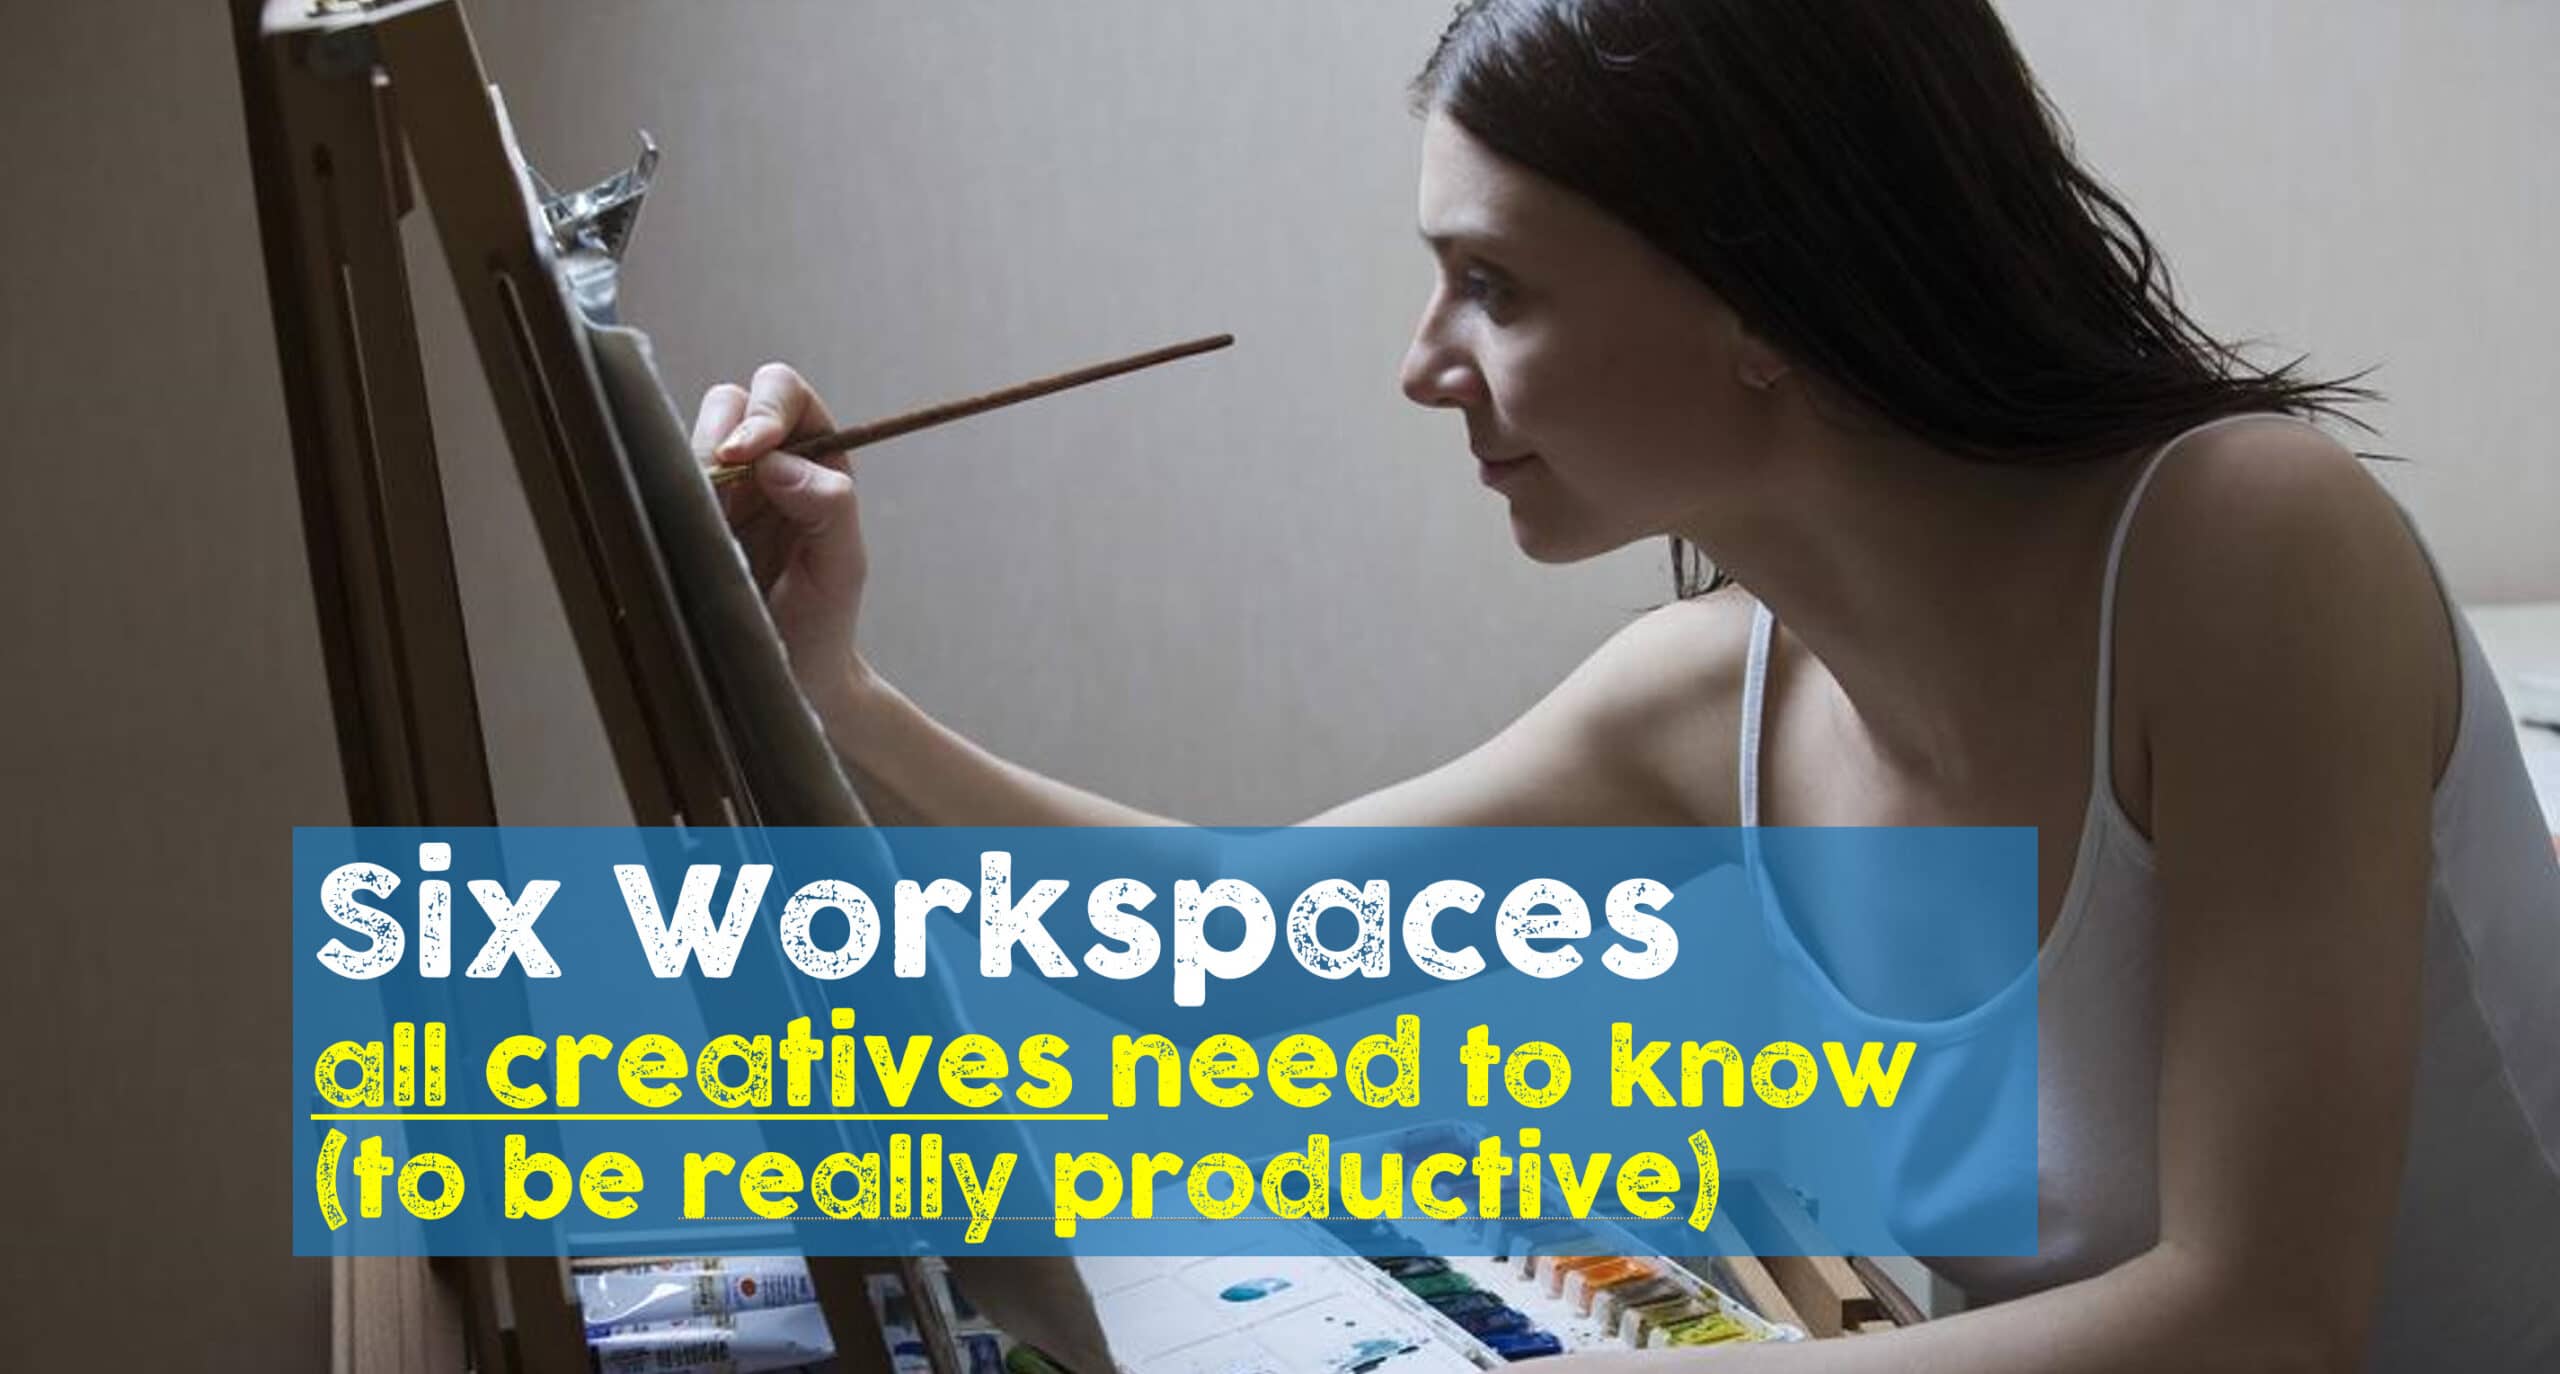 [Video] 6 Workspaces All Creatives Need to Know